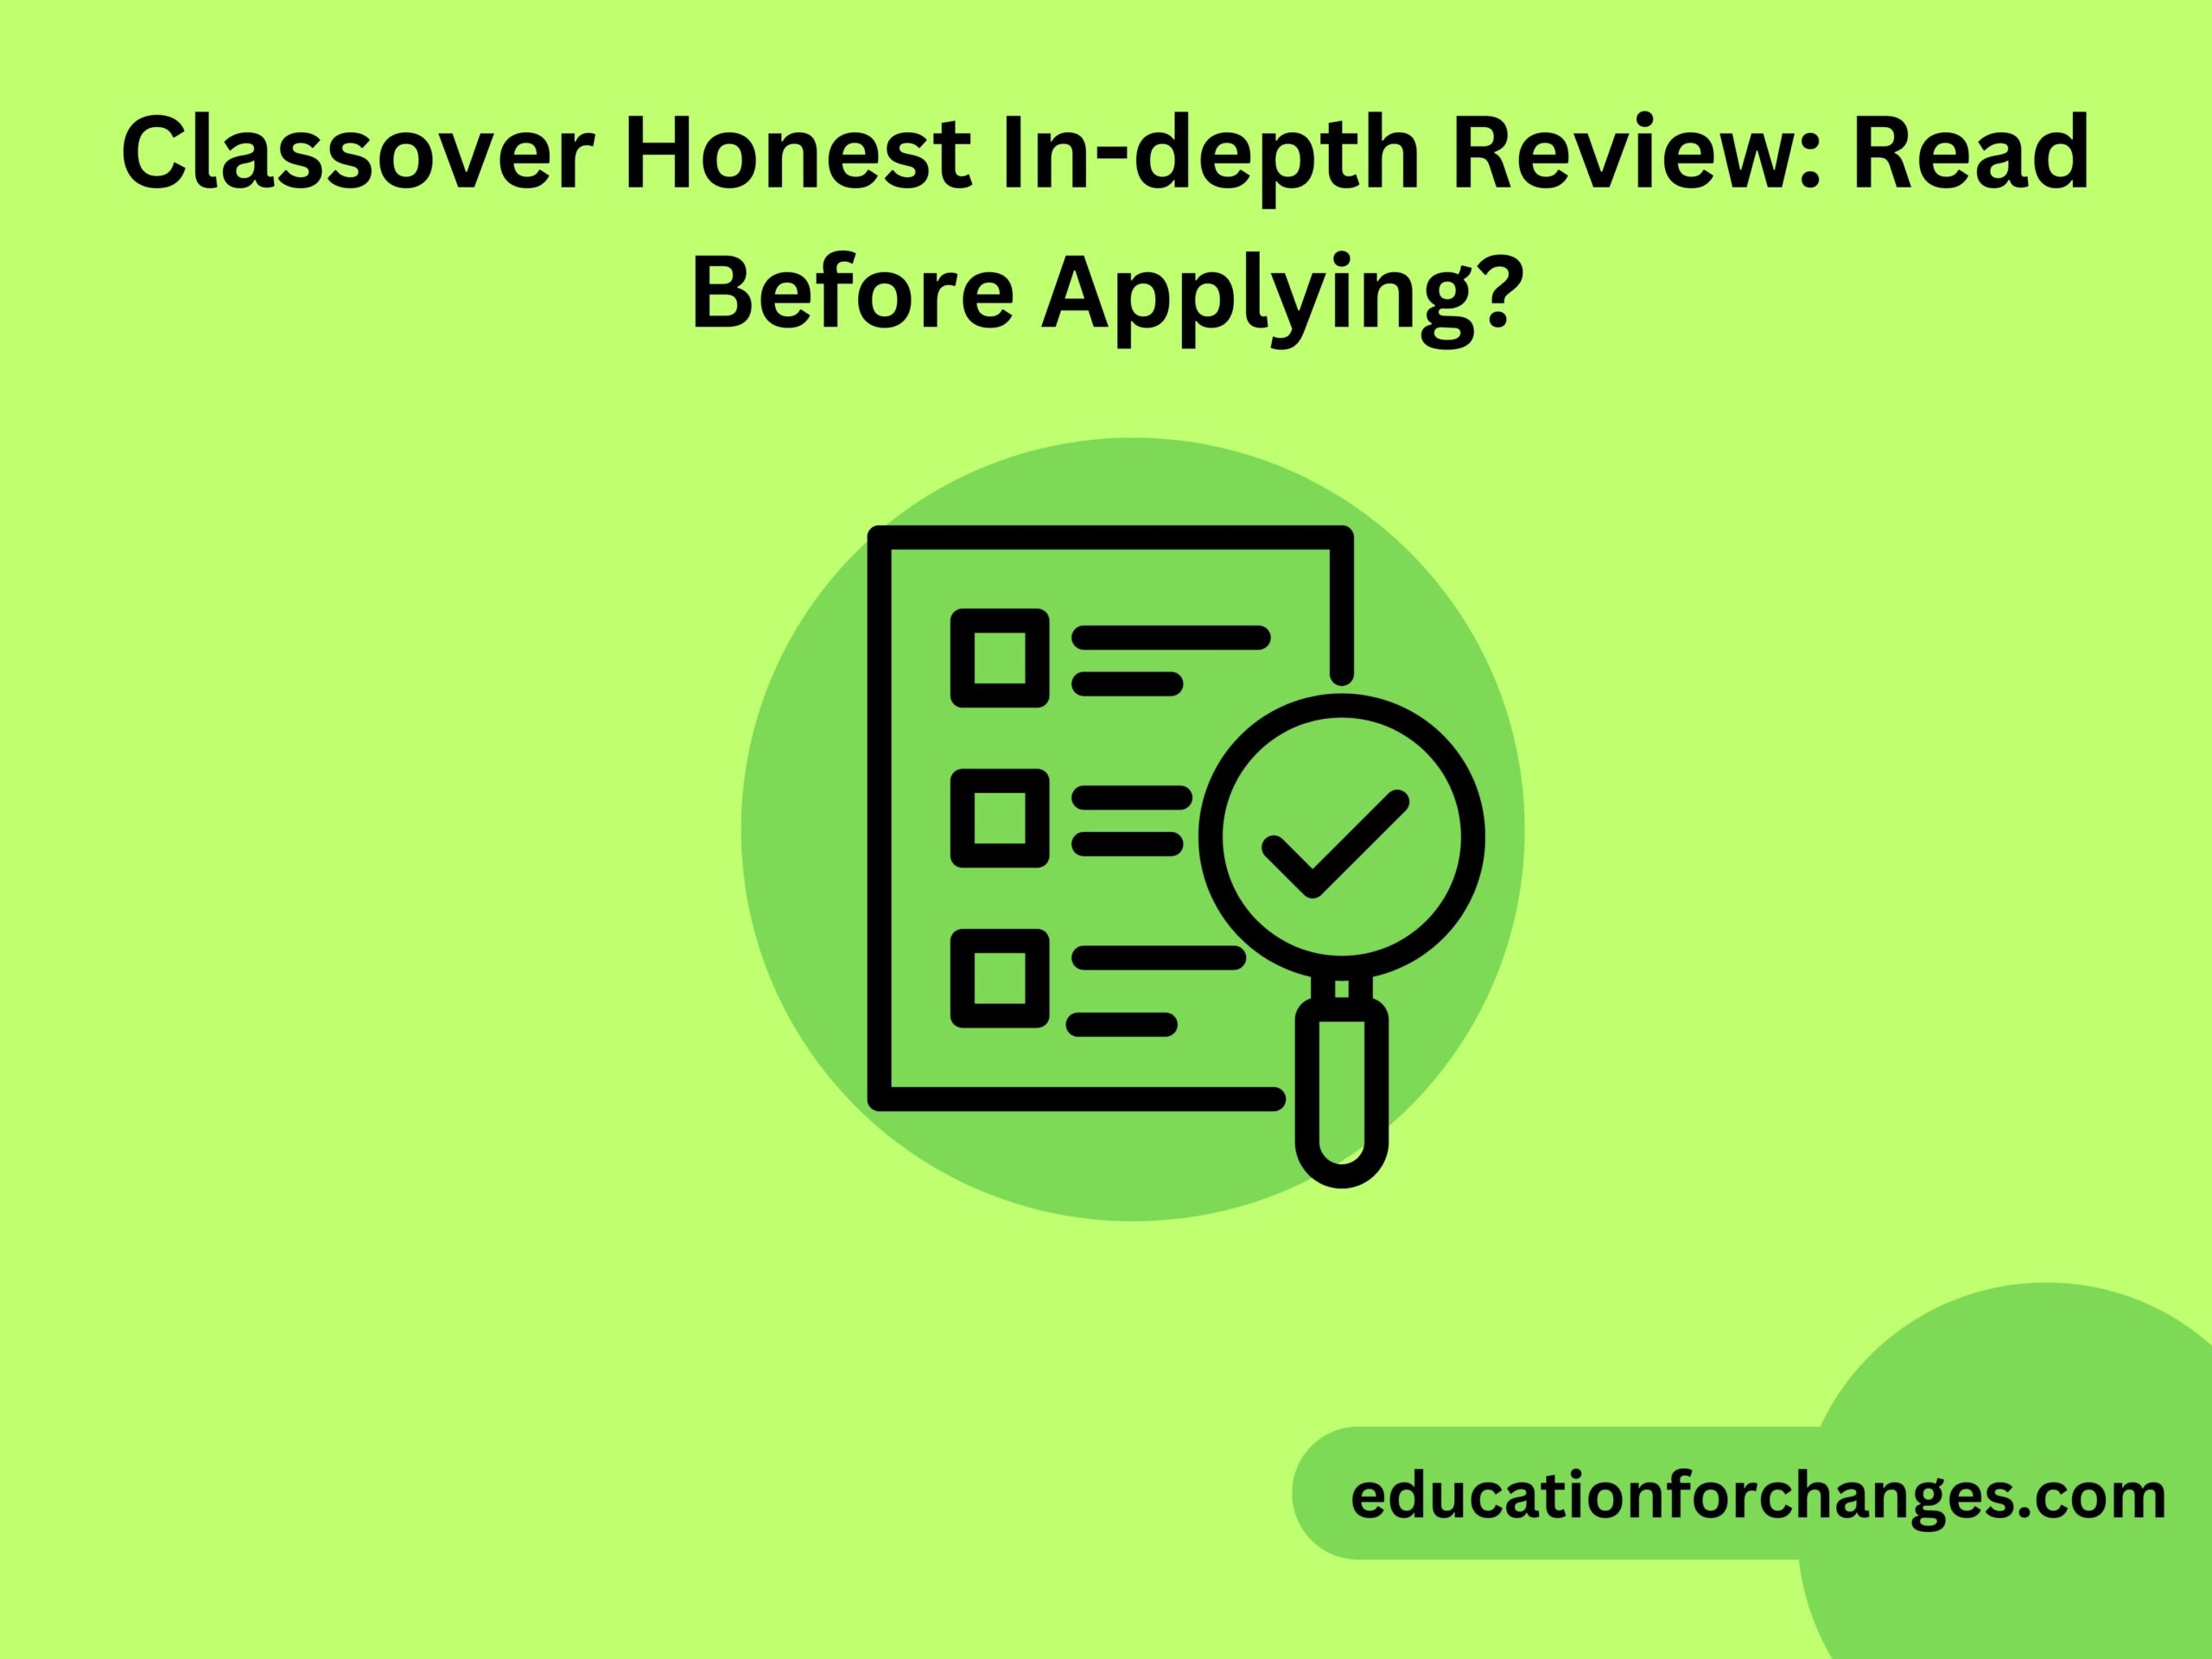 Classover Honest In-depth Review Read Before Applying